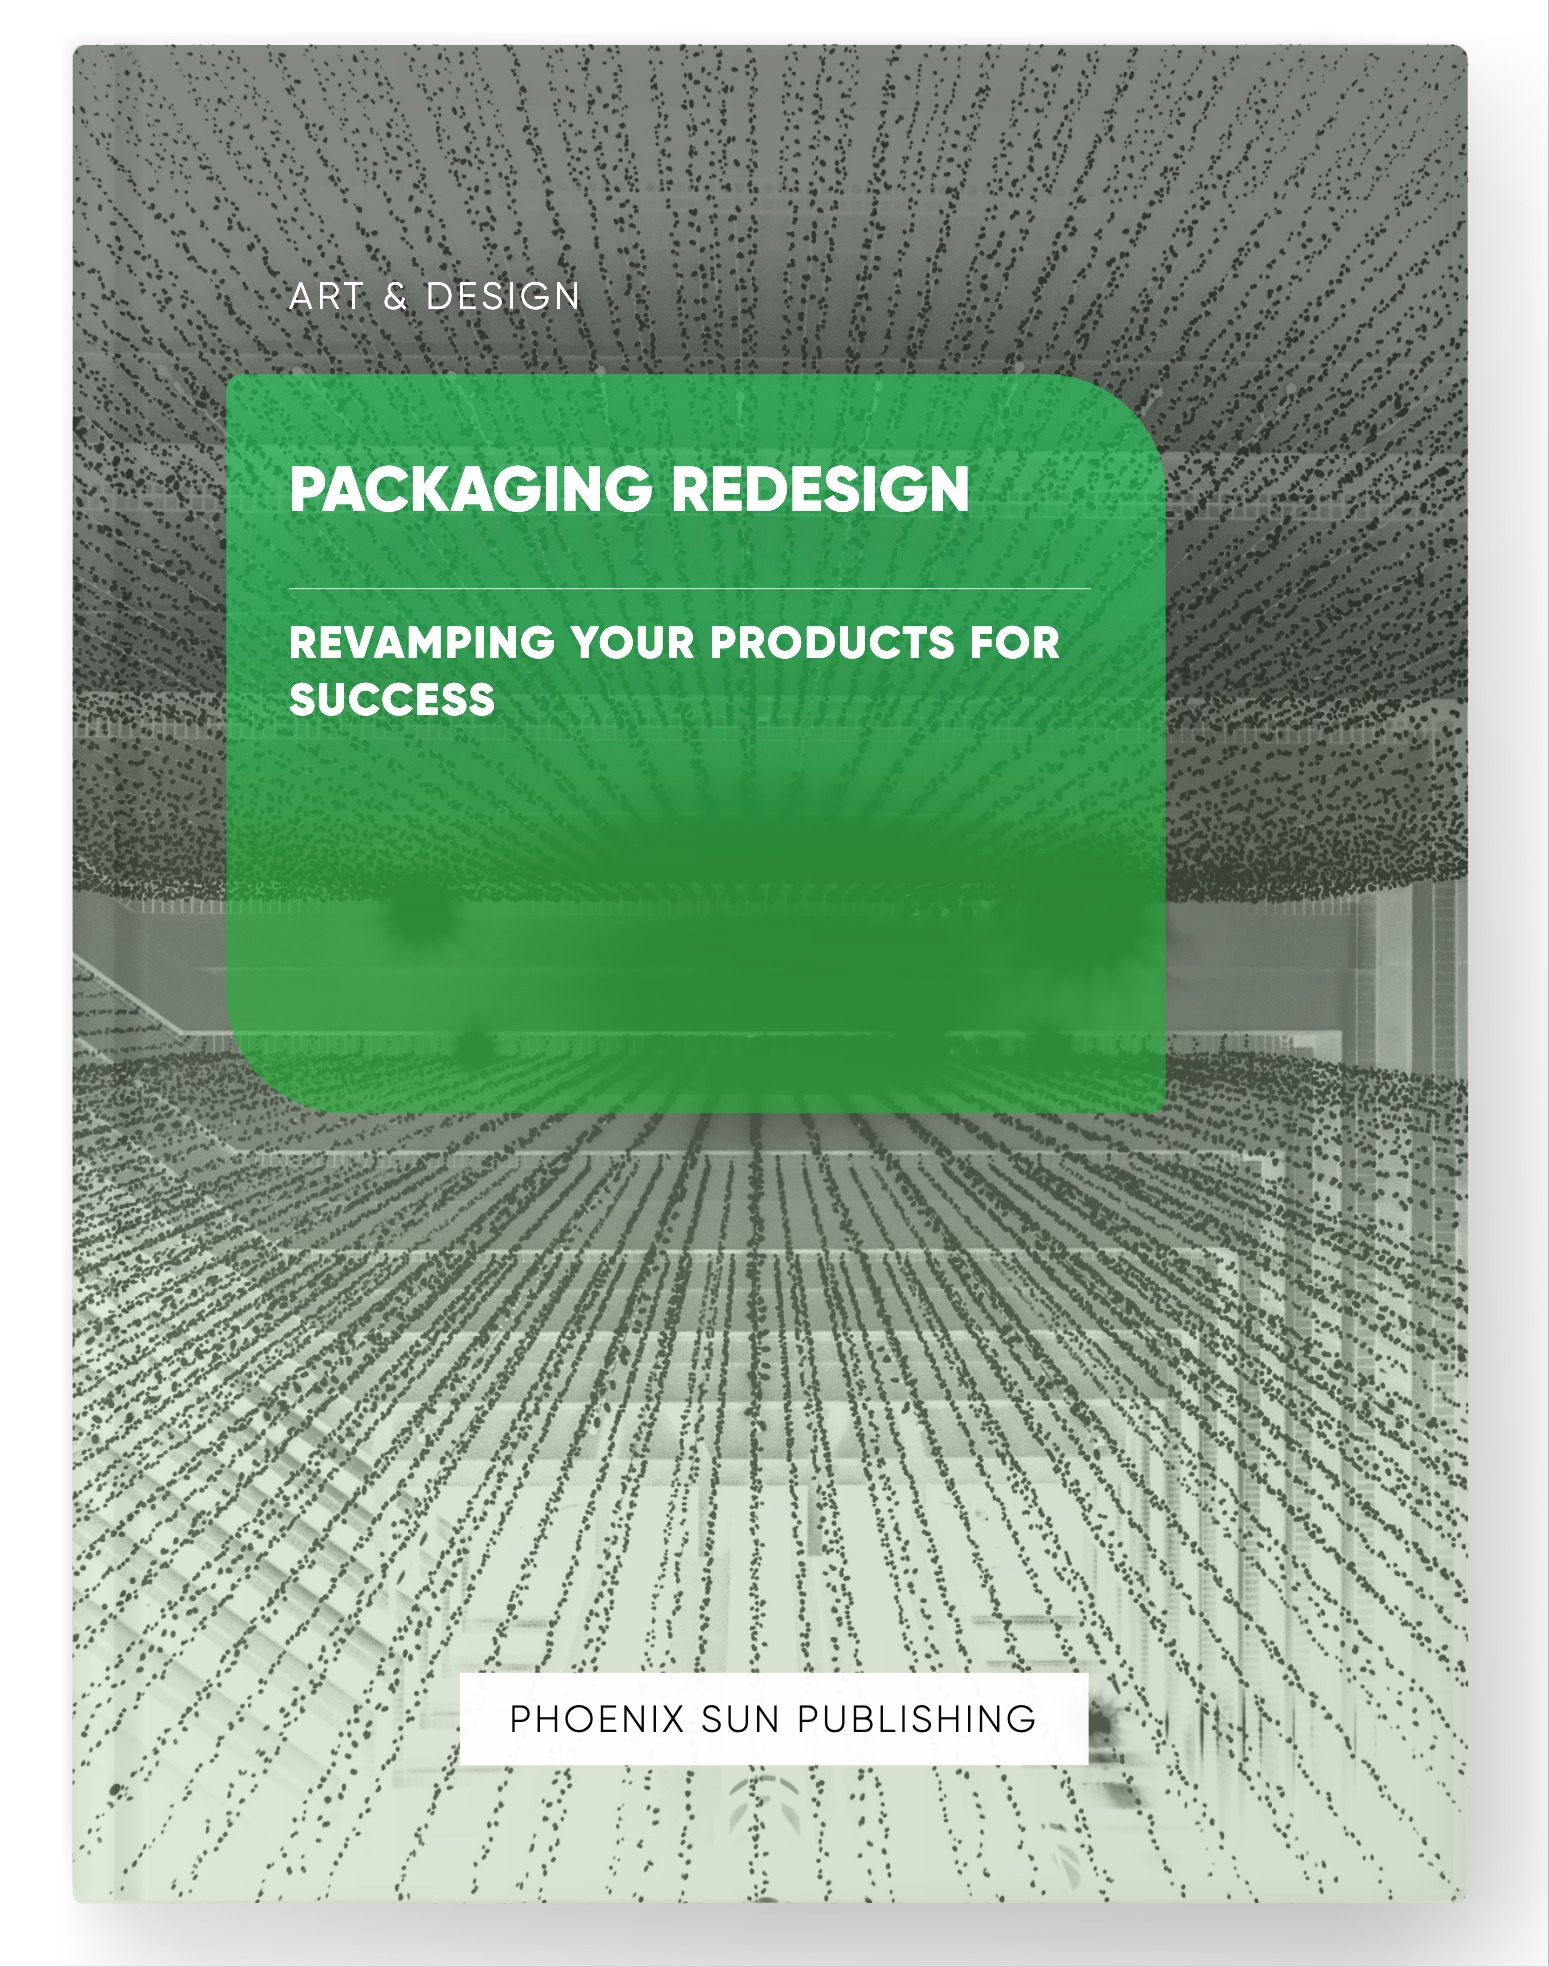 Packaging Redesign – Revamping Your Products for Success